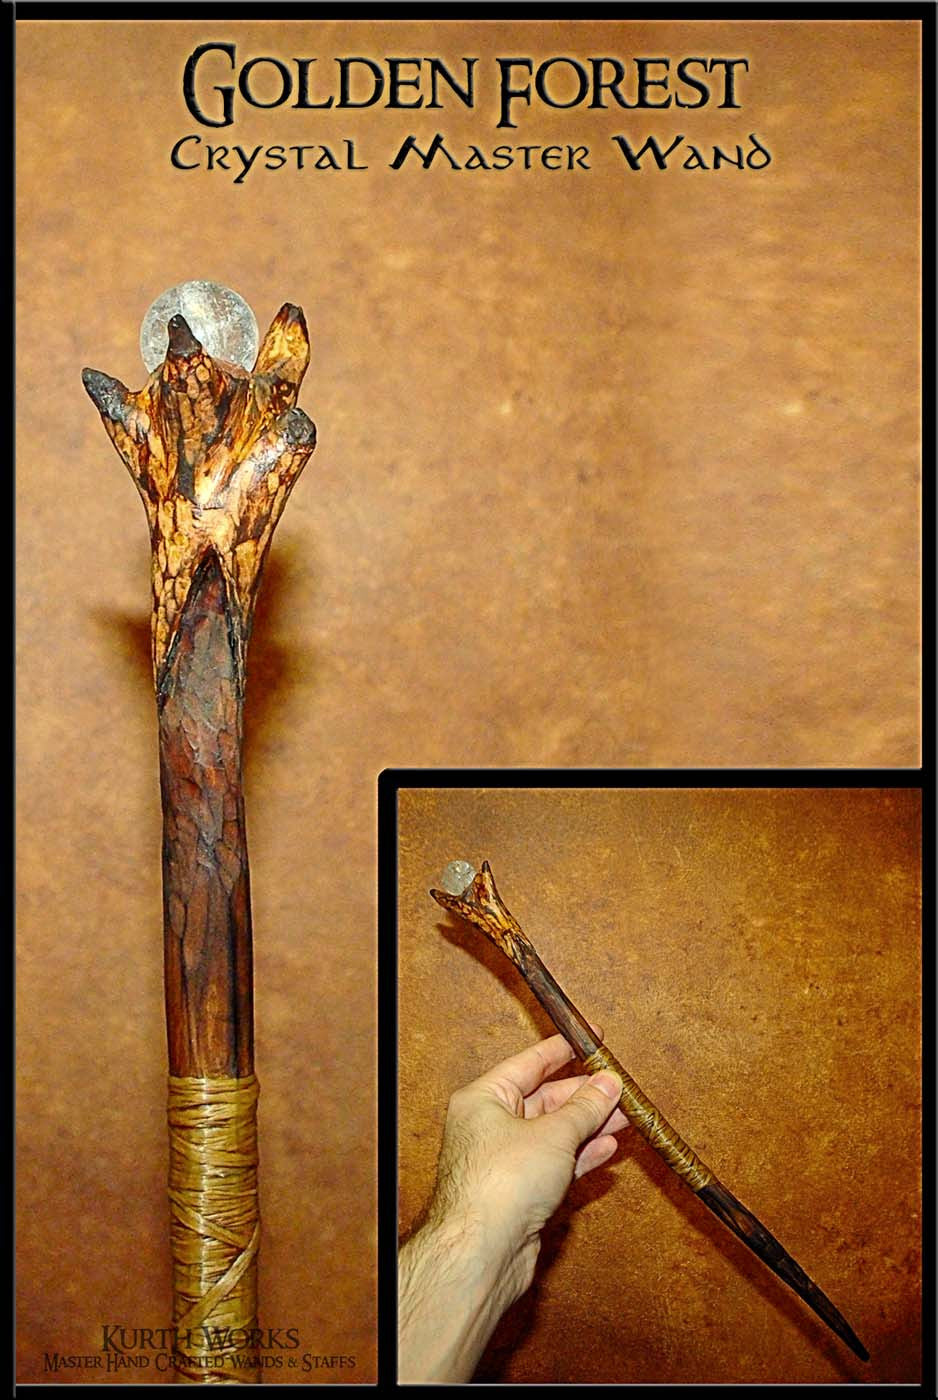 Golden Forest Master Crystal Wand 1